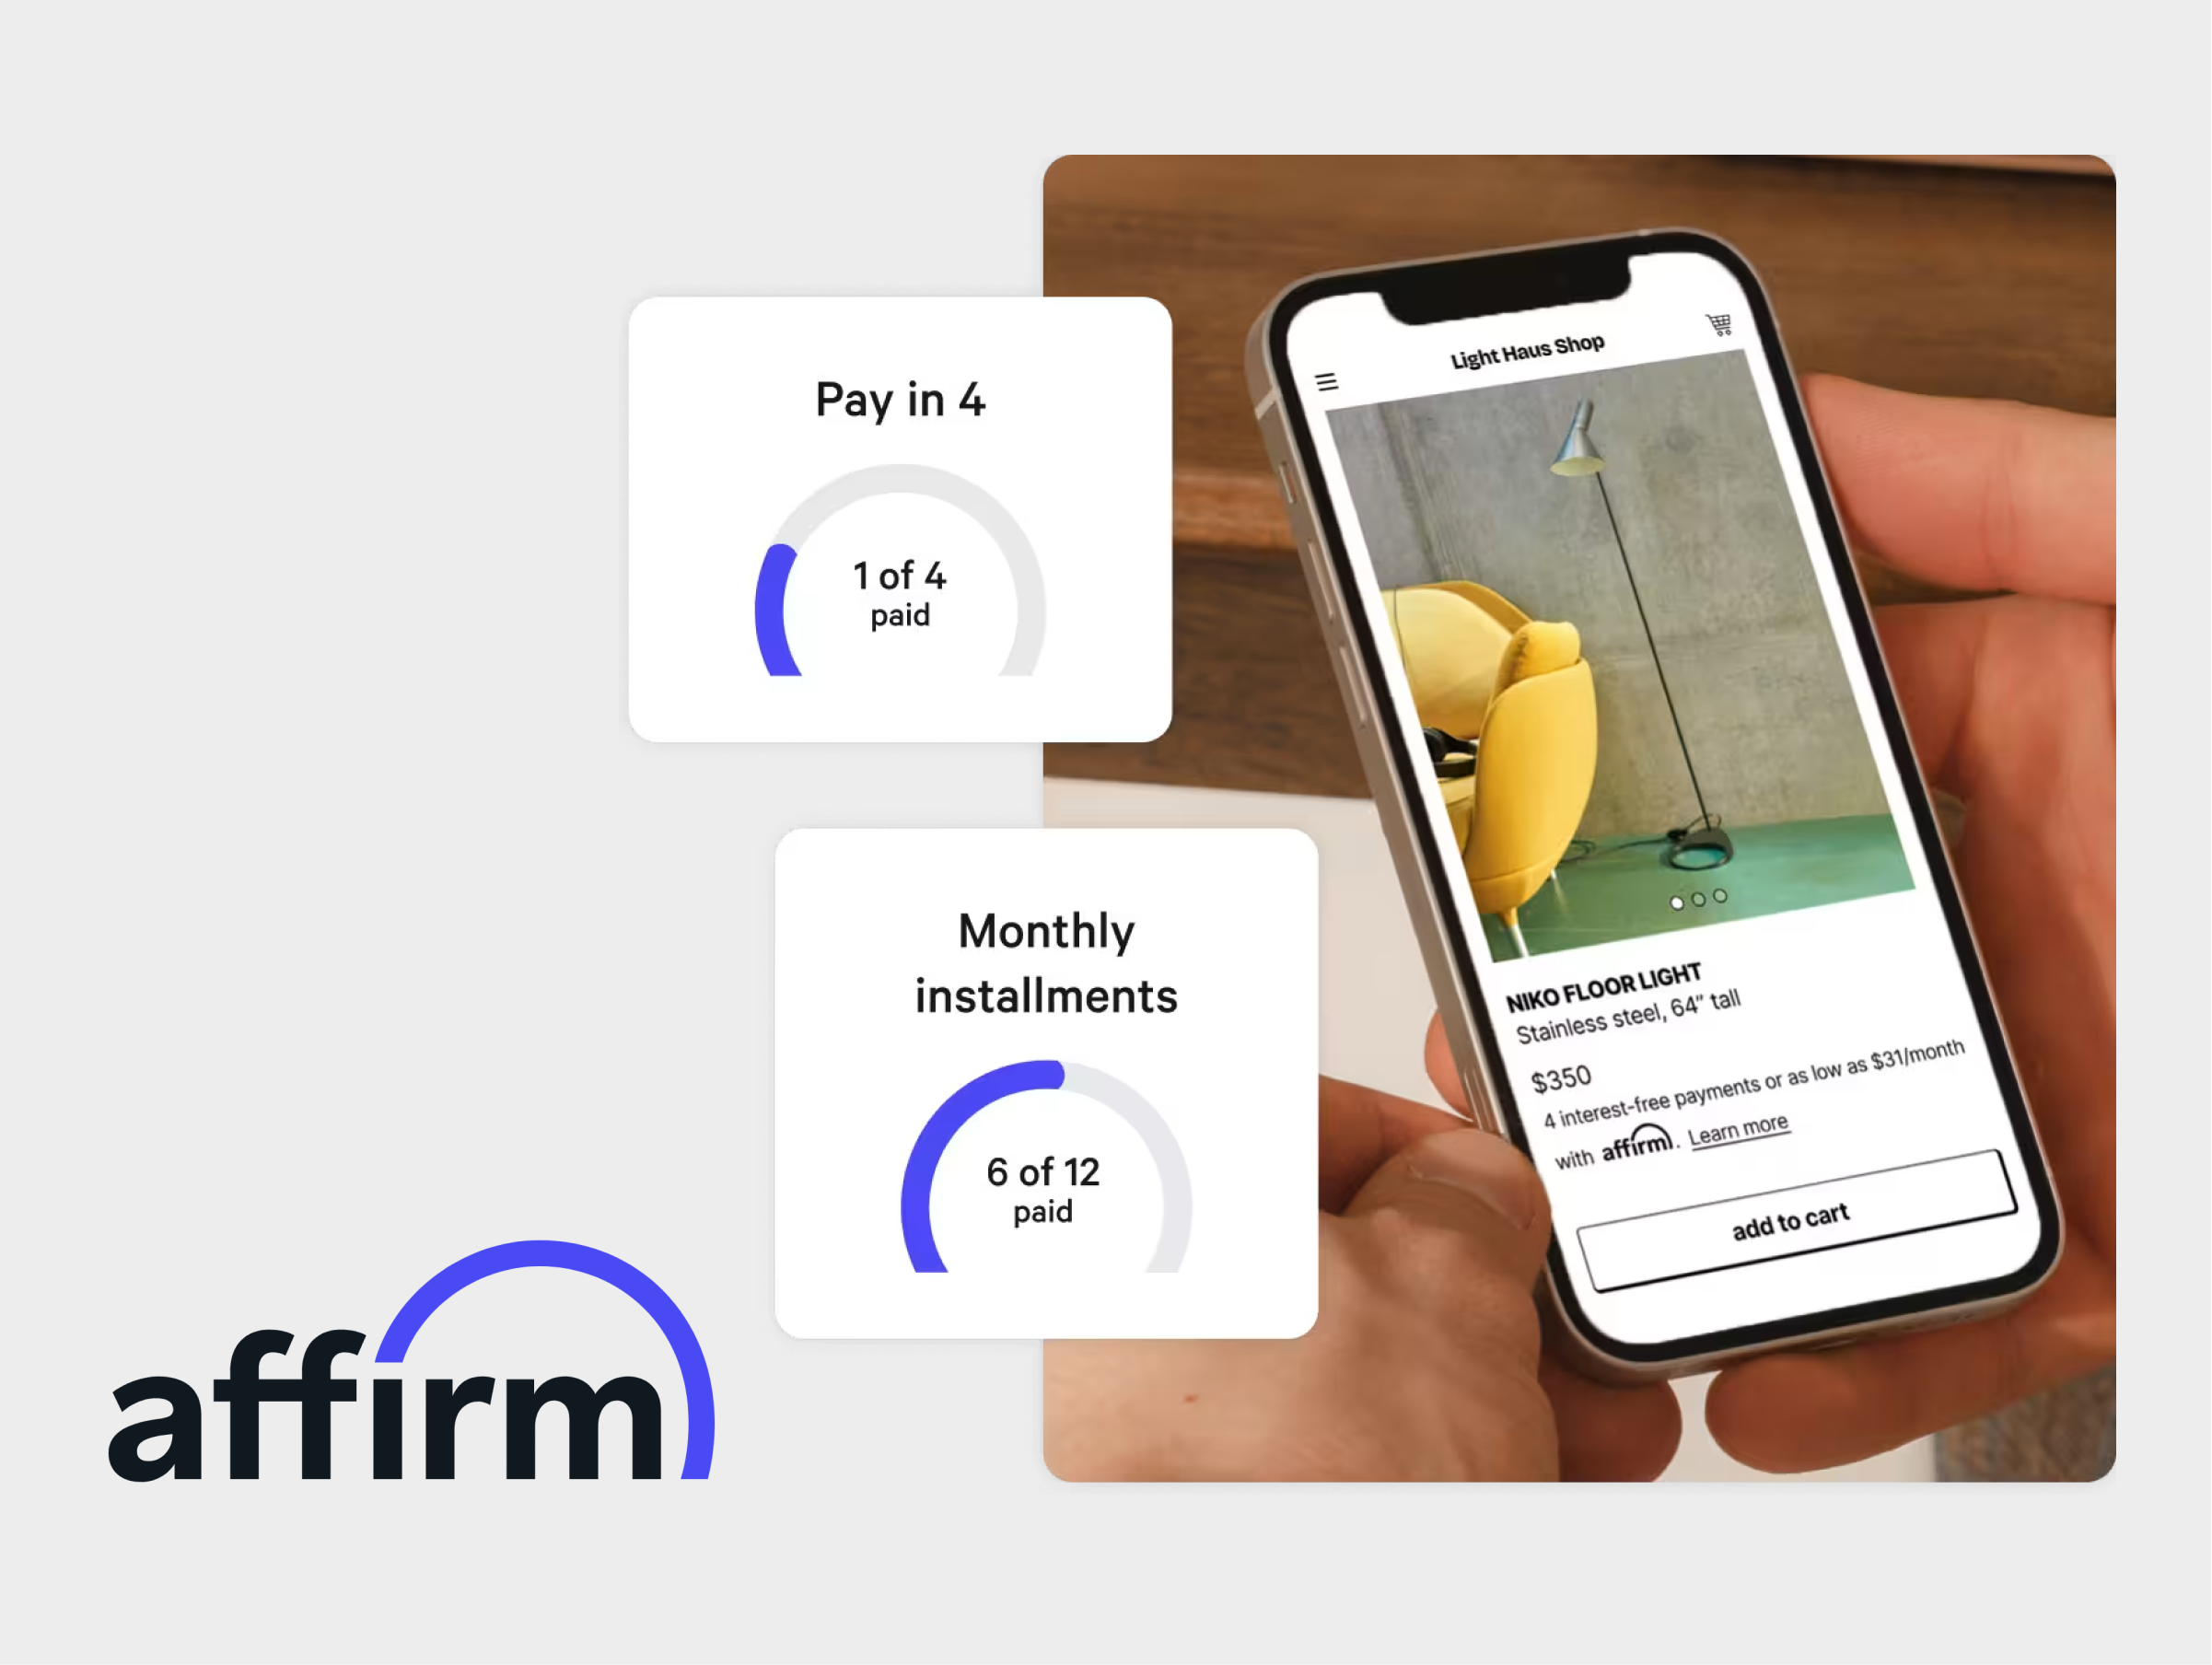 Affirm advertisement featuring a person holding a smartphone displaying an online shop with a product listing for a floor lamp priced at $350. Next to the phone, two payment options are shown: 'Pay in 4' with 1 of 4 payments completed, and 'Monthly installments' with 6 of 12 payments completed. The Affirm logo is visible at the bottom left of the image.